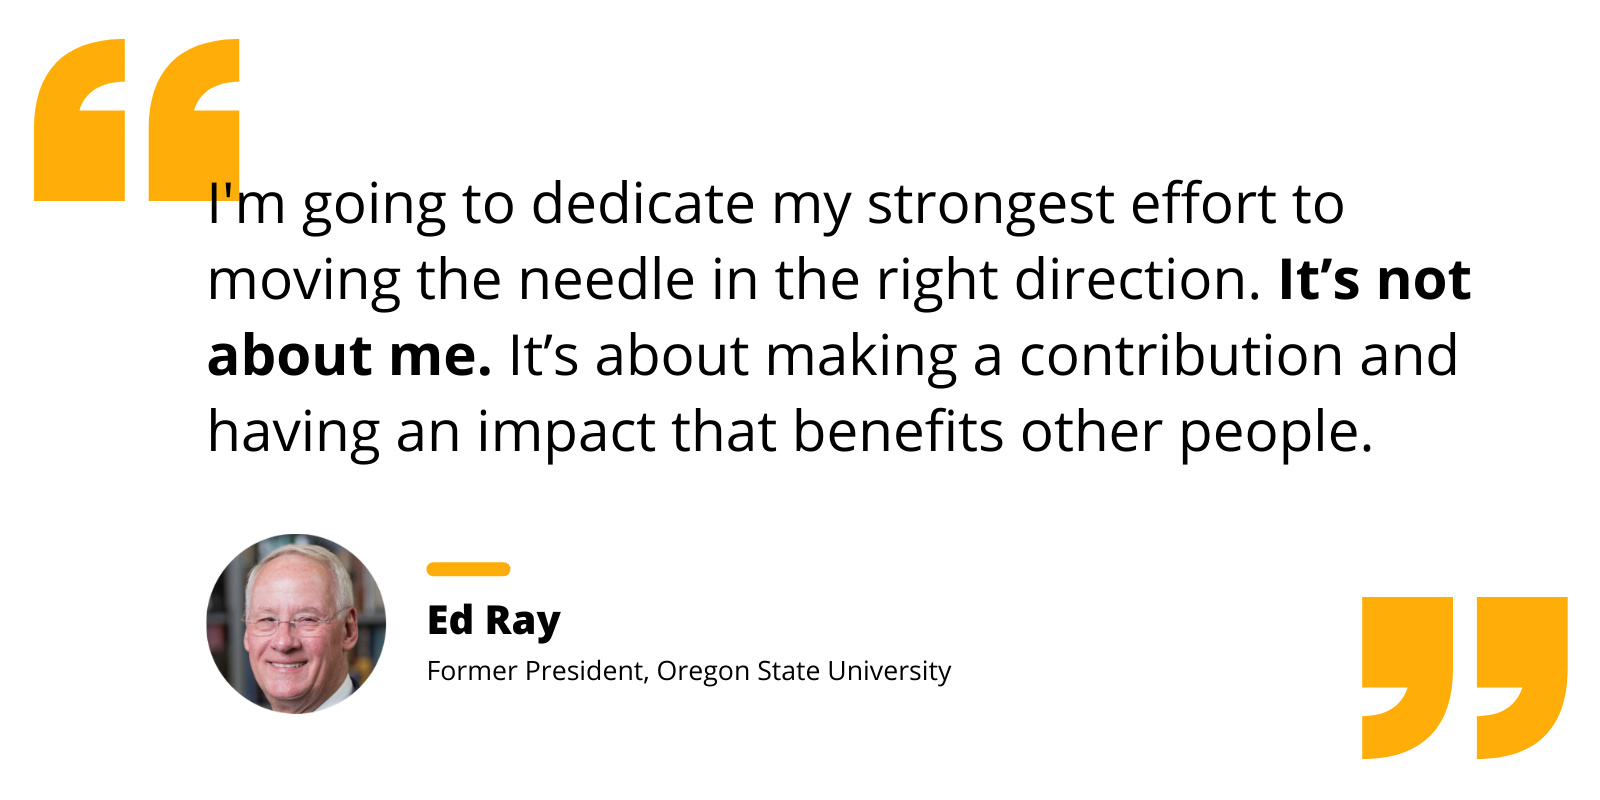 Quote by Ed Ray re: moving the needle in the right direction and making a contribution. "It's not about me."